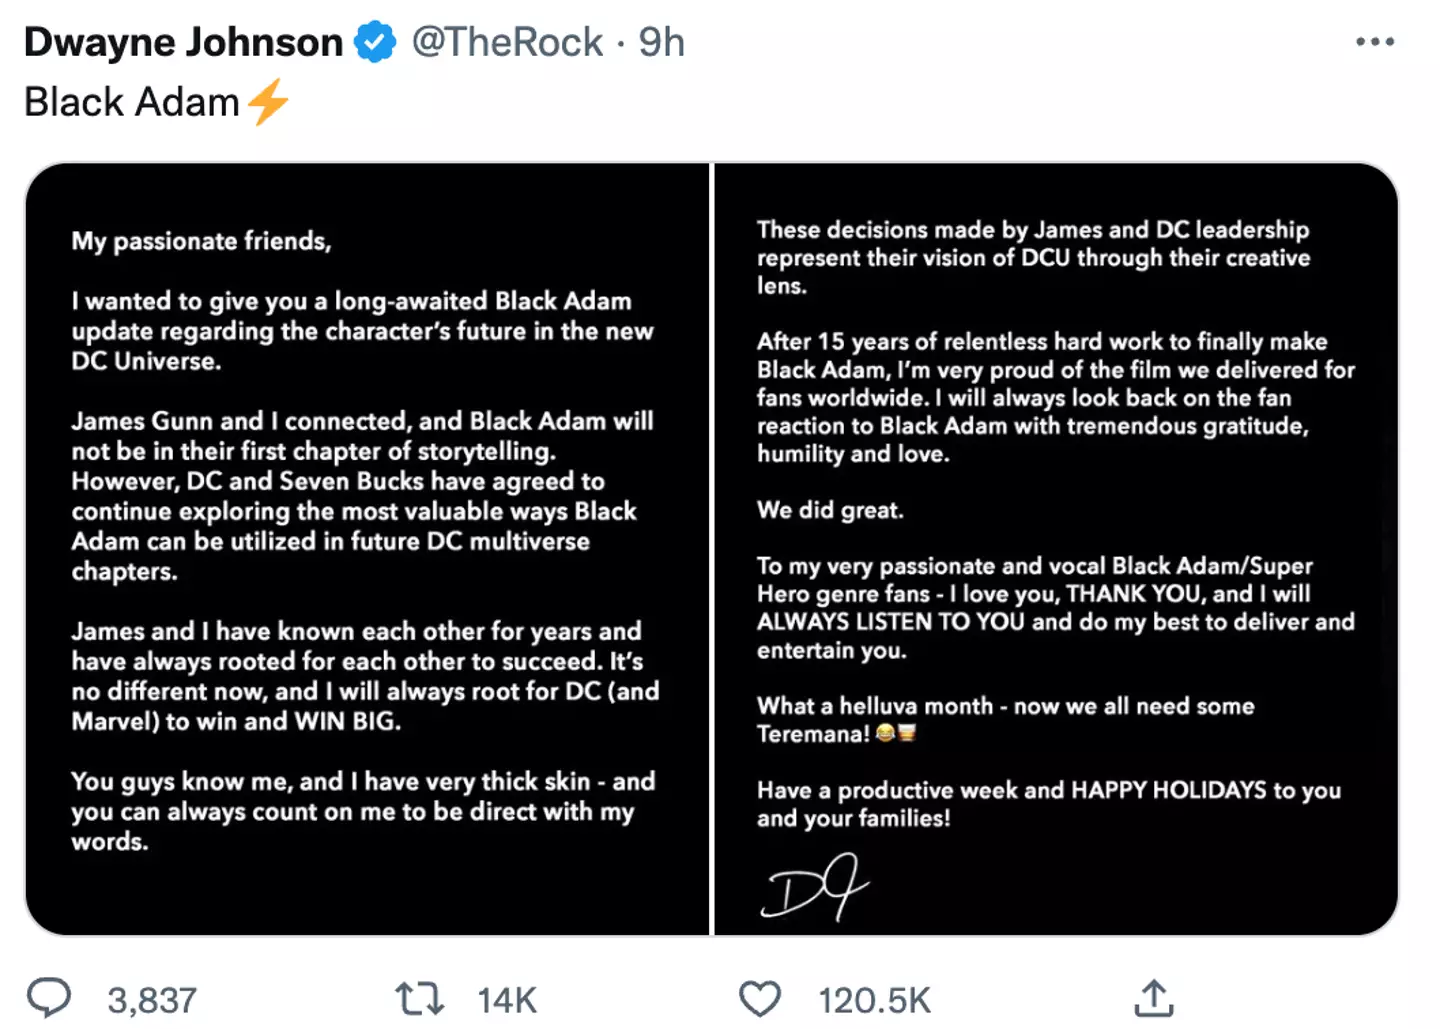 Johnson opened up about the future of Black Adam on Twitter.